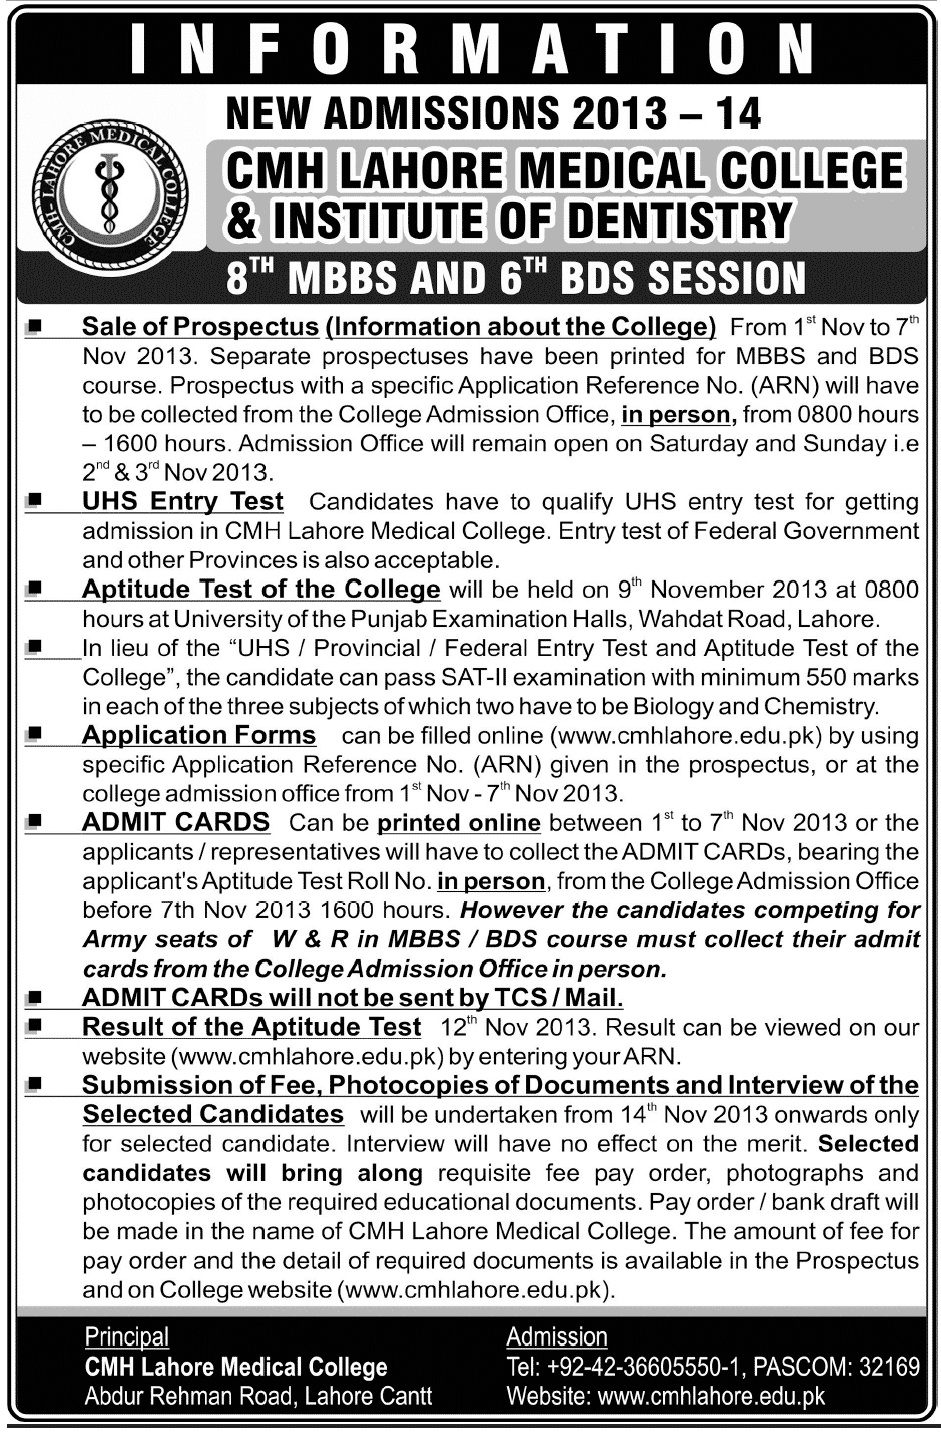 cmh-lahore-mbbs-bds-admission-form-submission-entry-test-result-2013-3jig